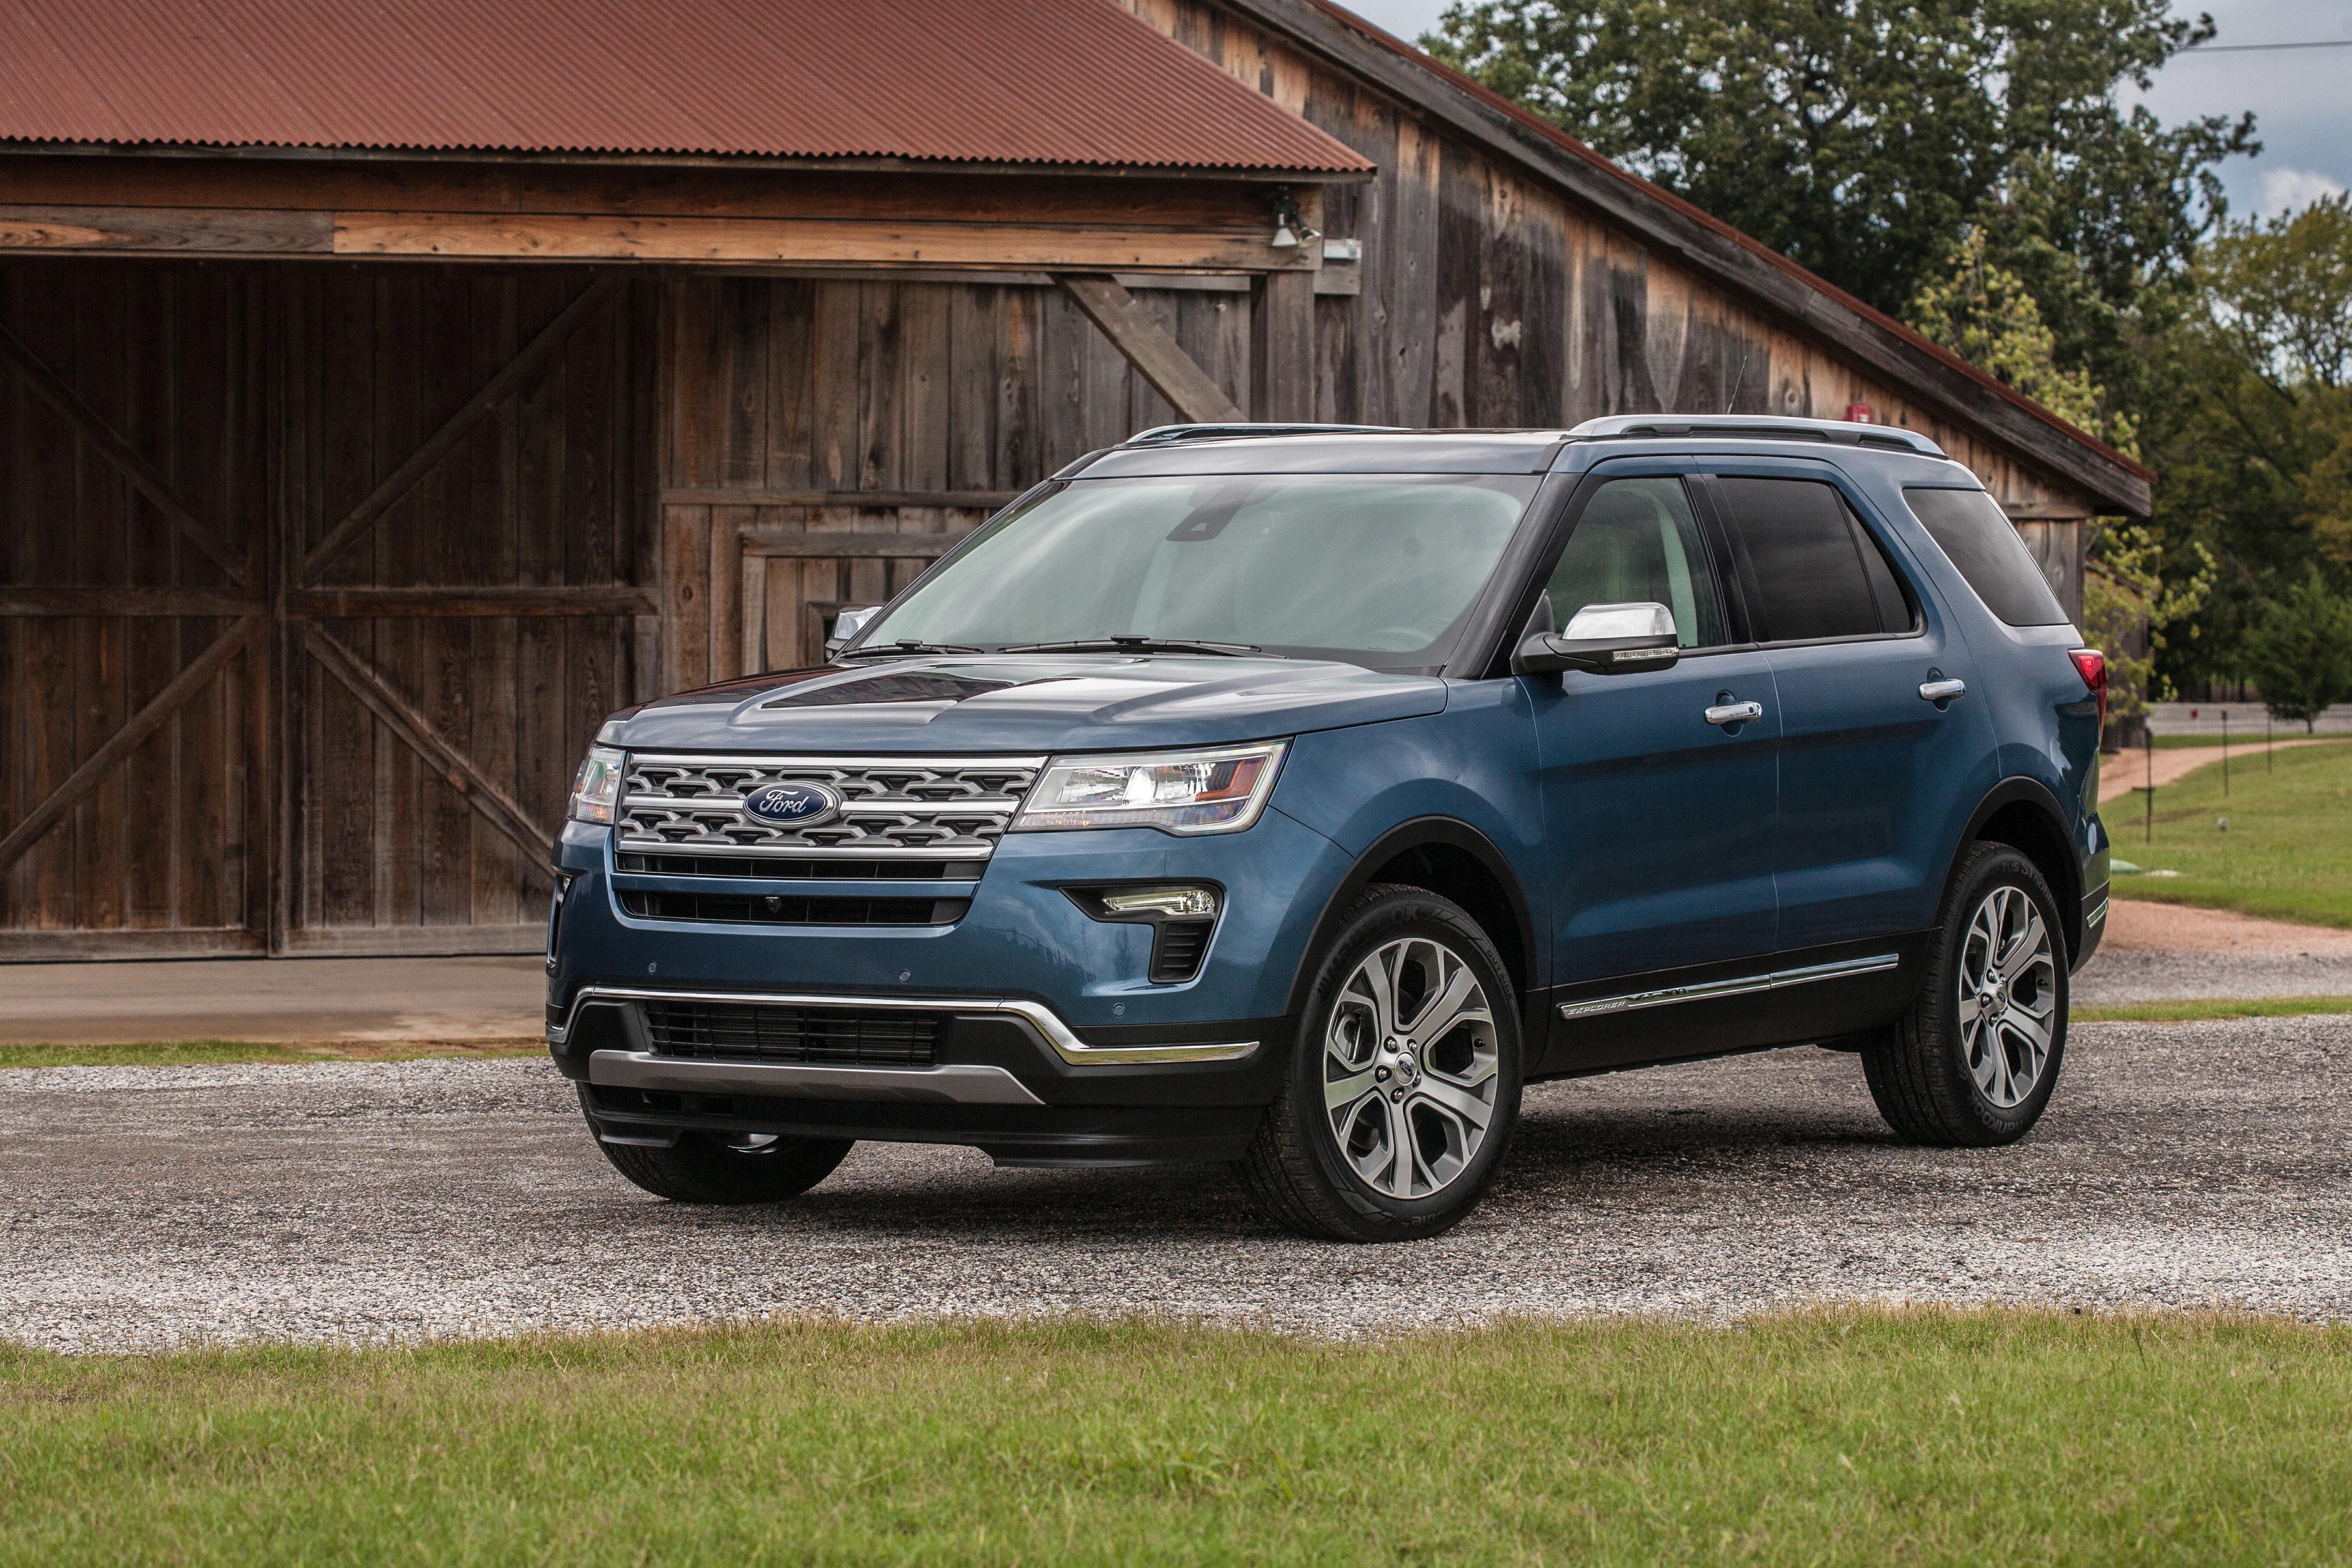 Limited 2019. Ford Explorer 2019. Джип Форд эксплорер 2019. Форд эксплорер Лимитед 2019. Джип Форд эксплорер 2017.